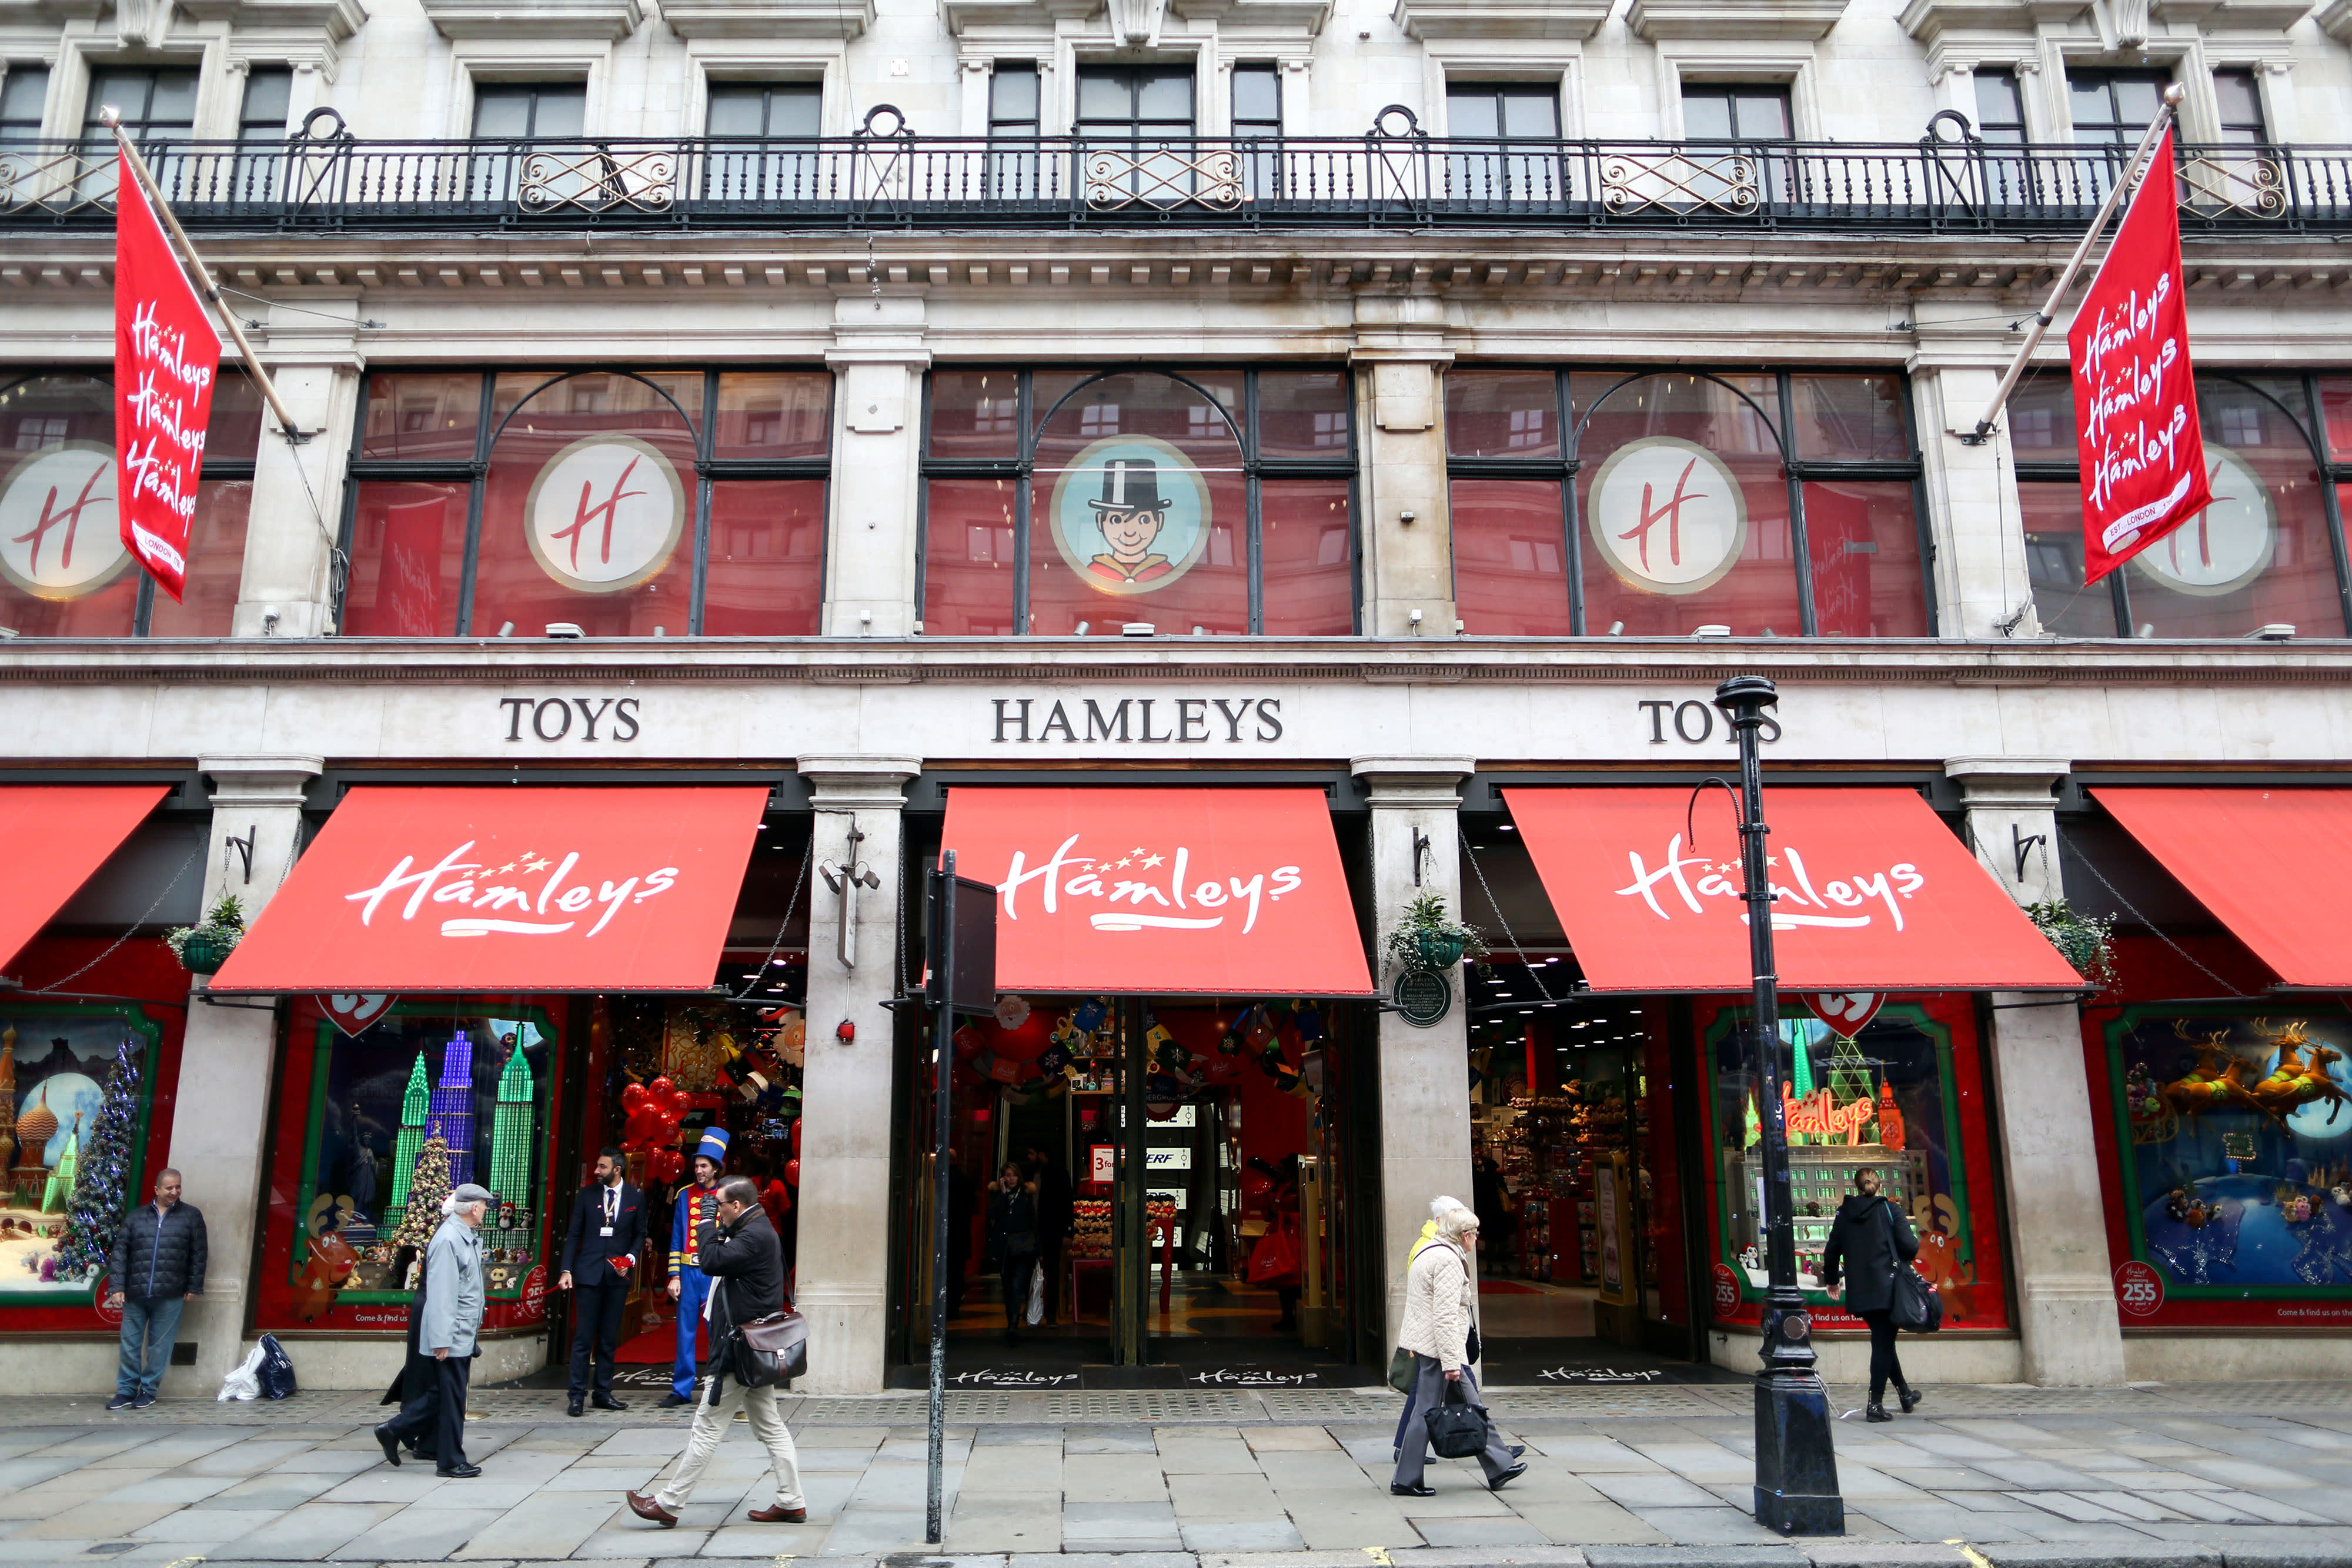 hamleys toys for 6 year olds